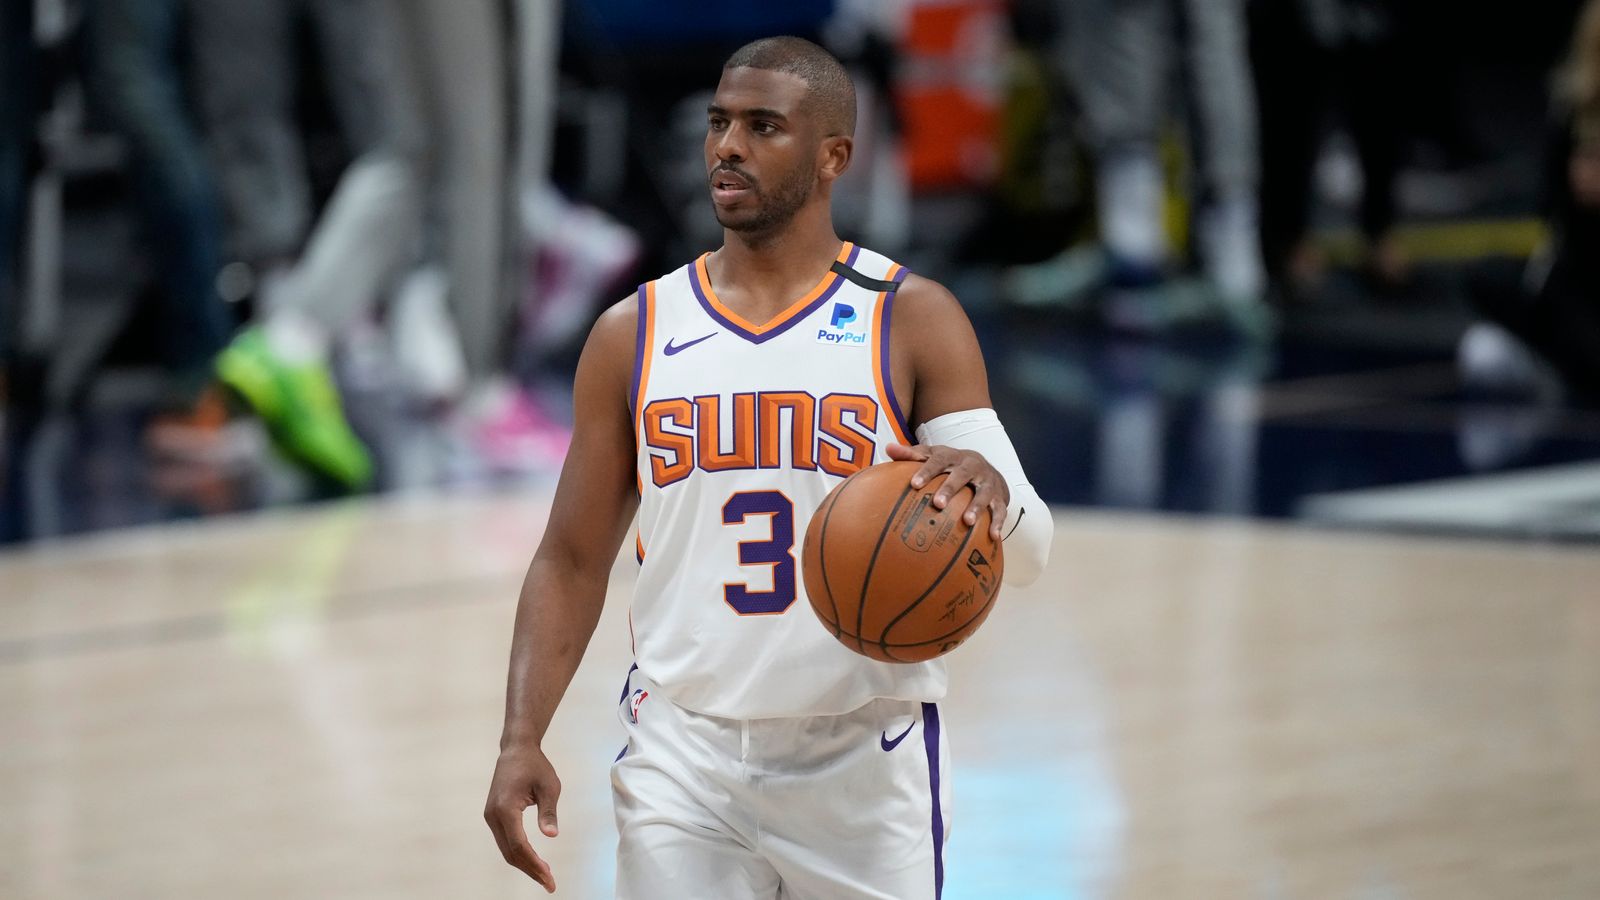 NBA Finals 2021 Player Analysis: Here's what Chris Paul needs to